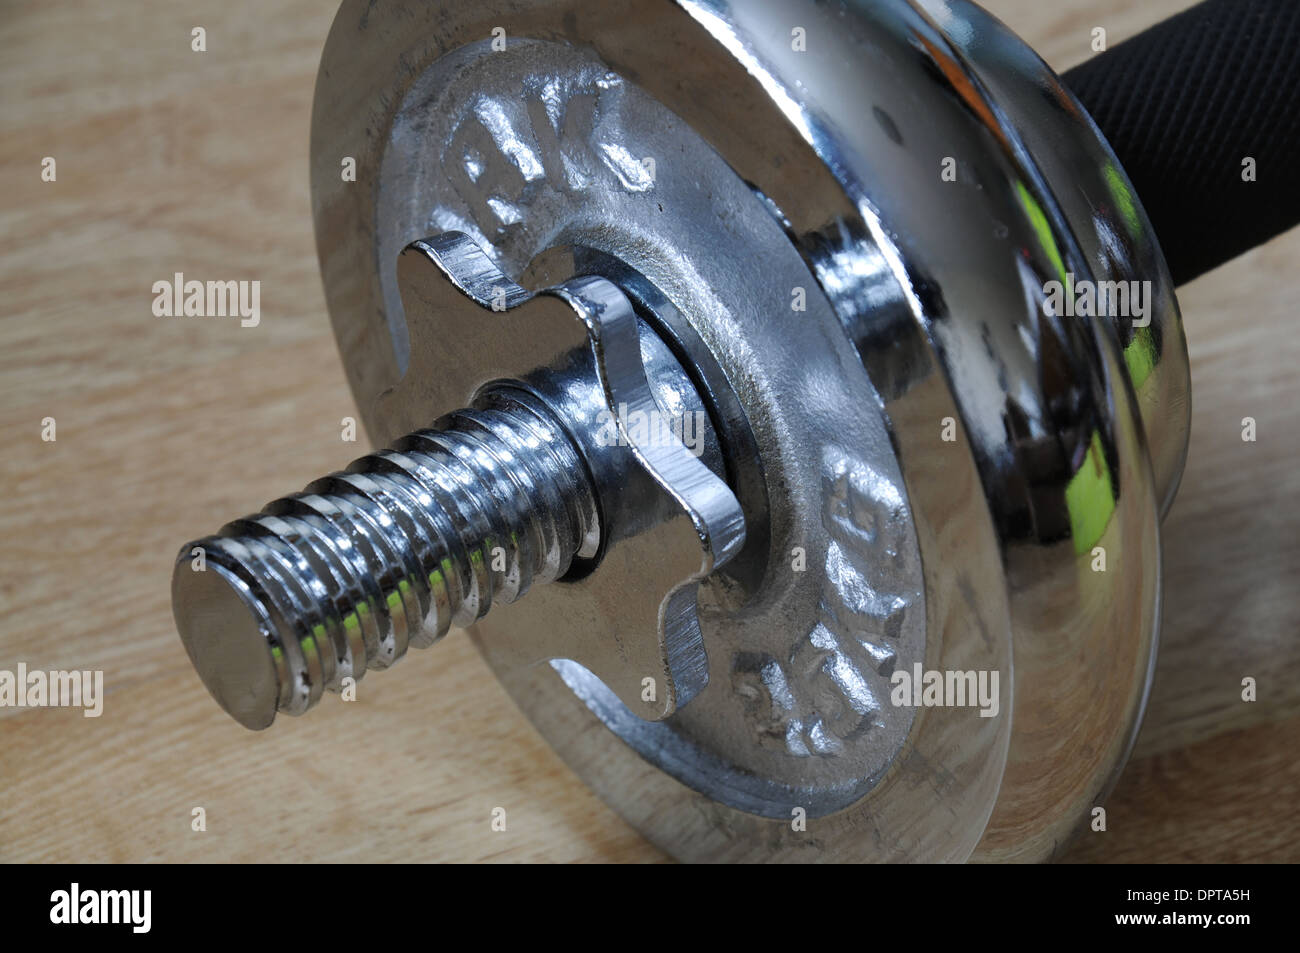 Closeup view of some heavy duty fitness weights Stock Photo